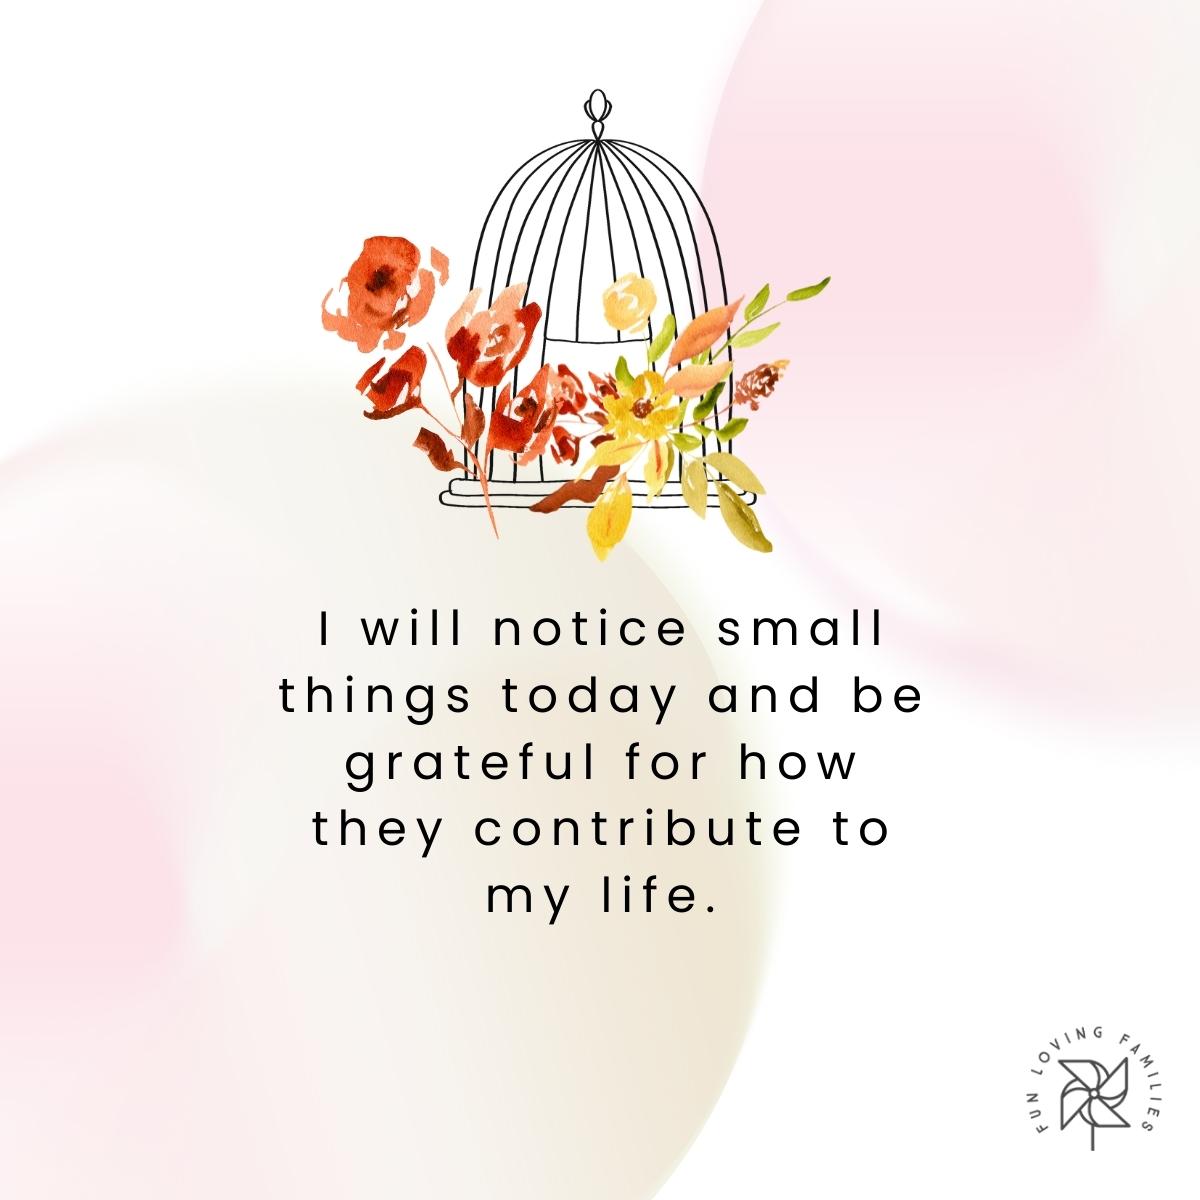 I will notice small things today and be grateful for how they contribute to my life affirmation